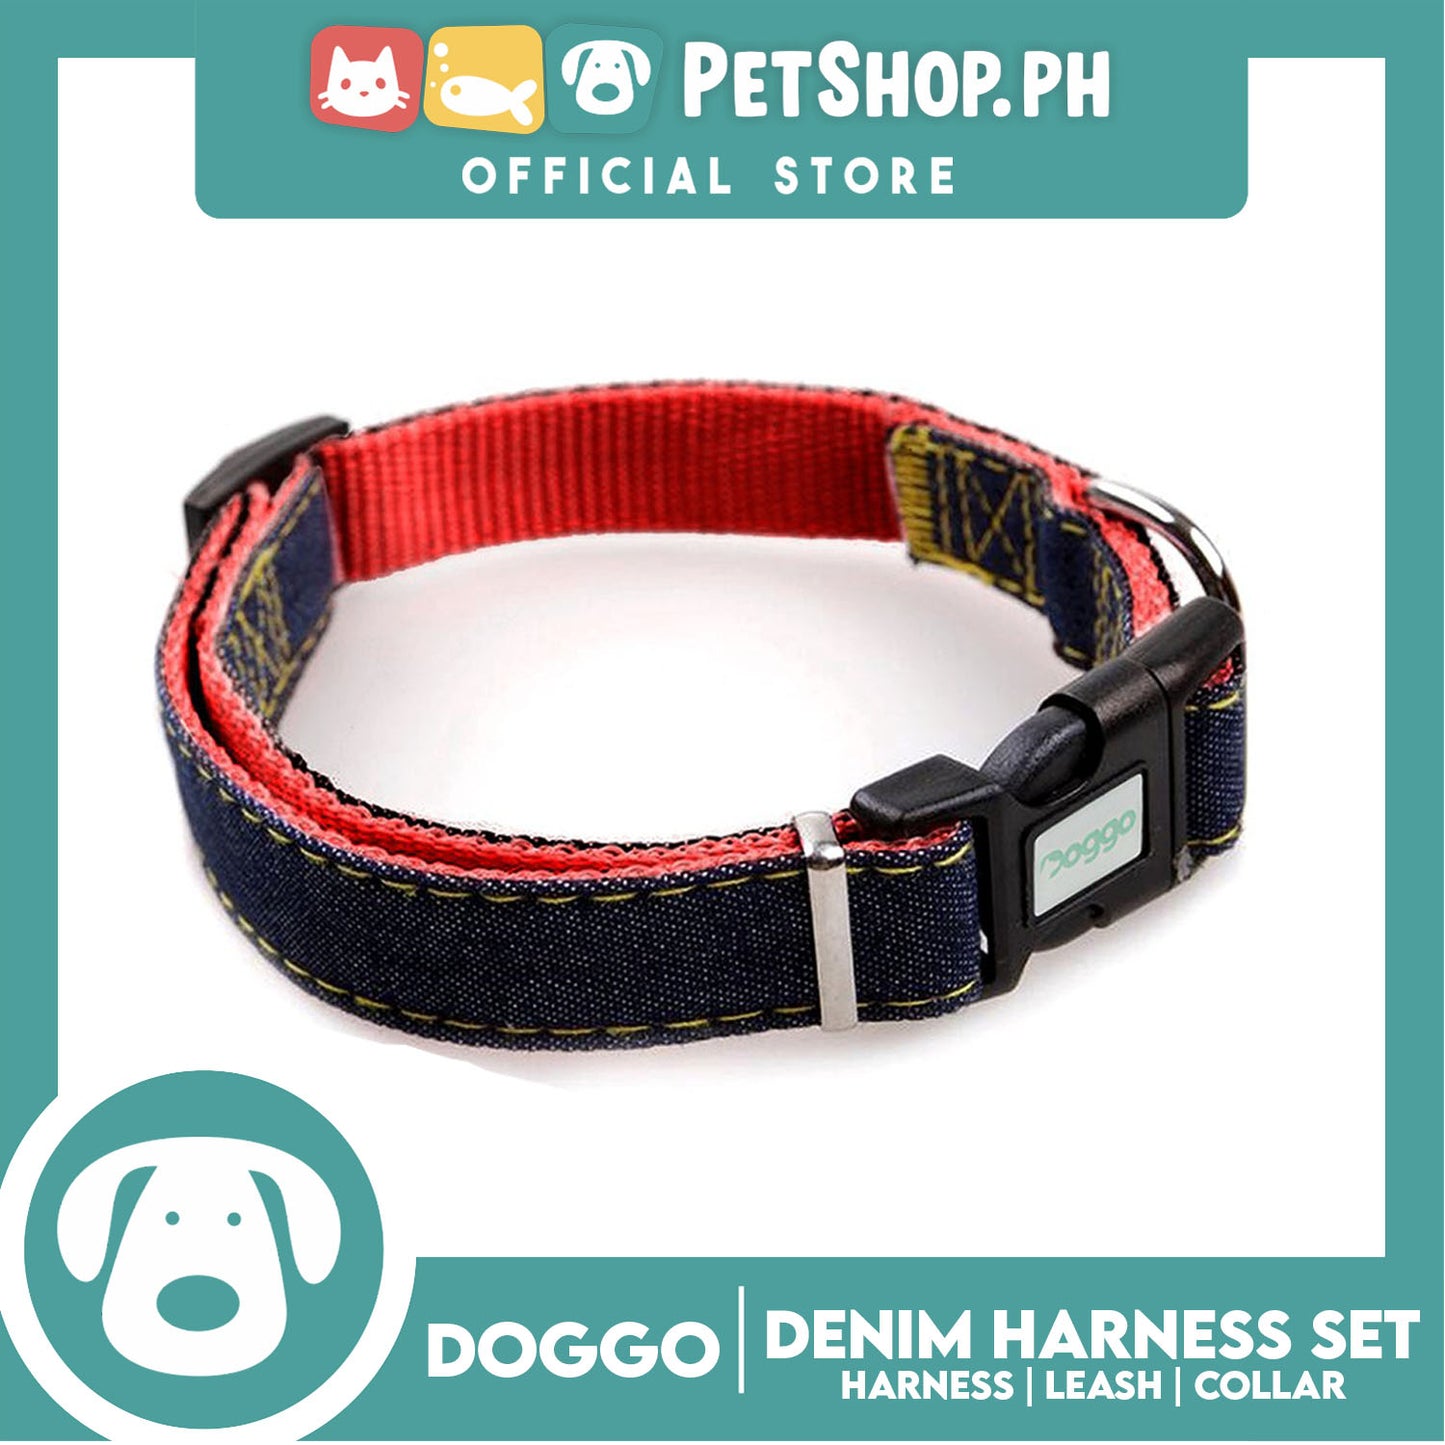 Doggo Strong Harness Set Denim Design Medium (Red) Harness, Leash and Collar for Your Dog